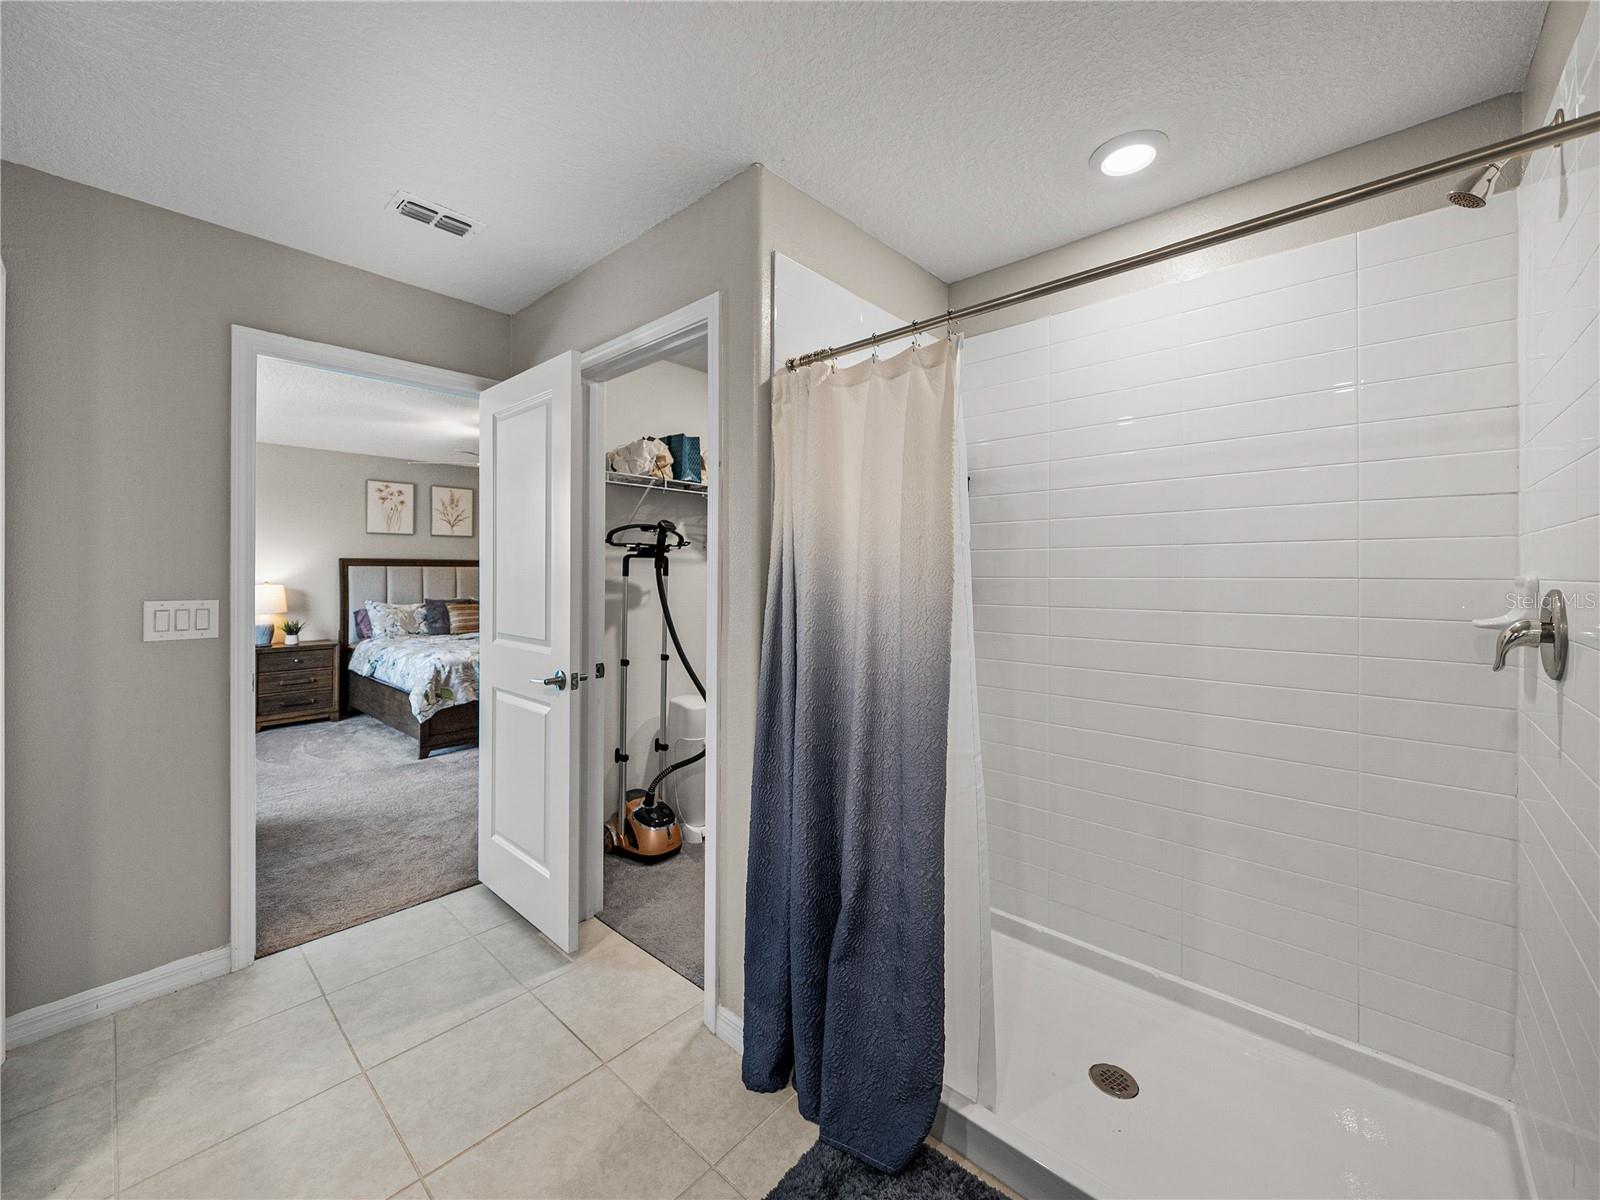 Master Bath with dual sinks, separate toilet room, linen closet and walk in shower.